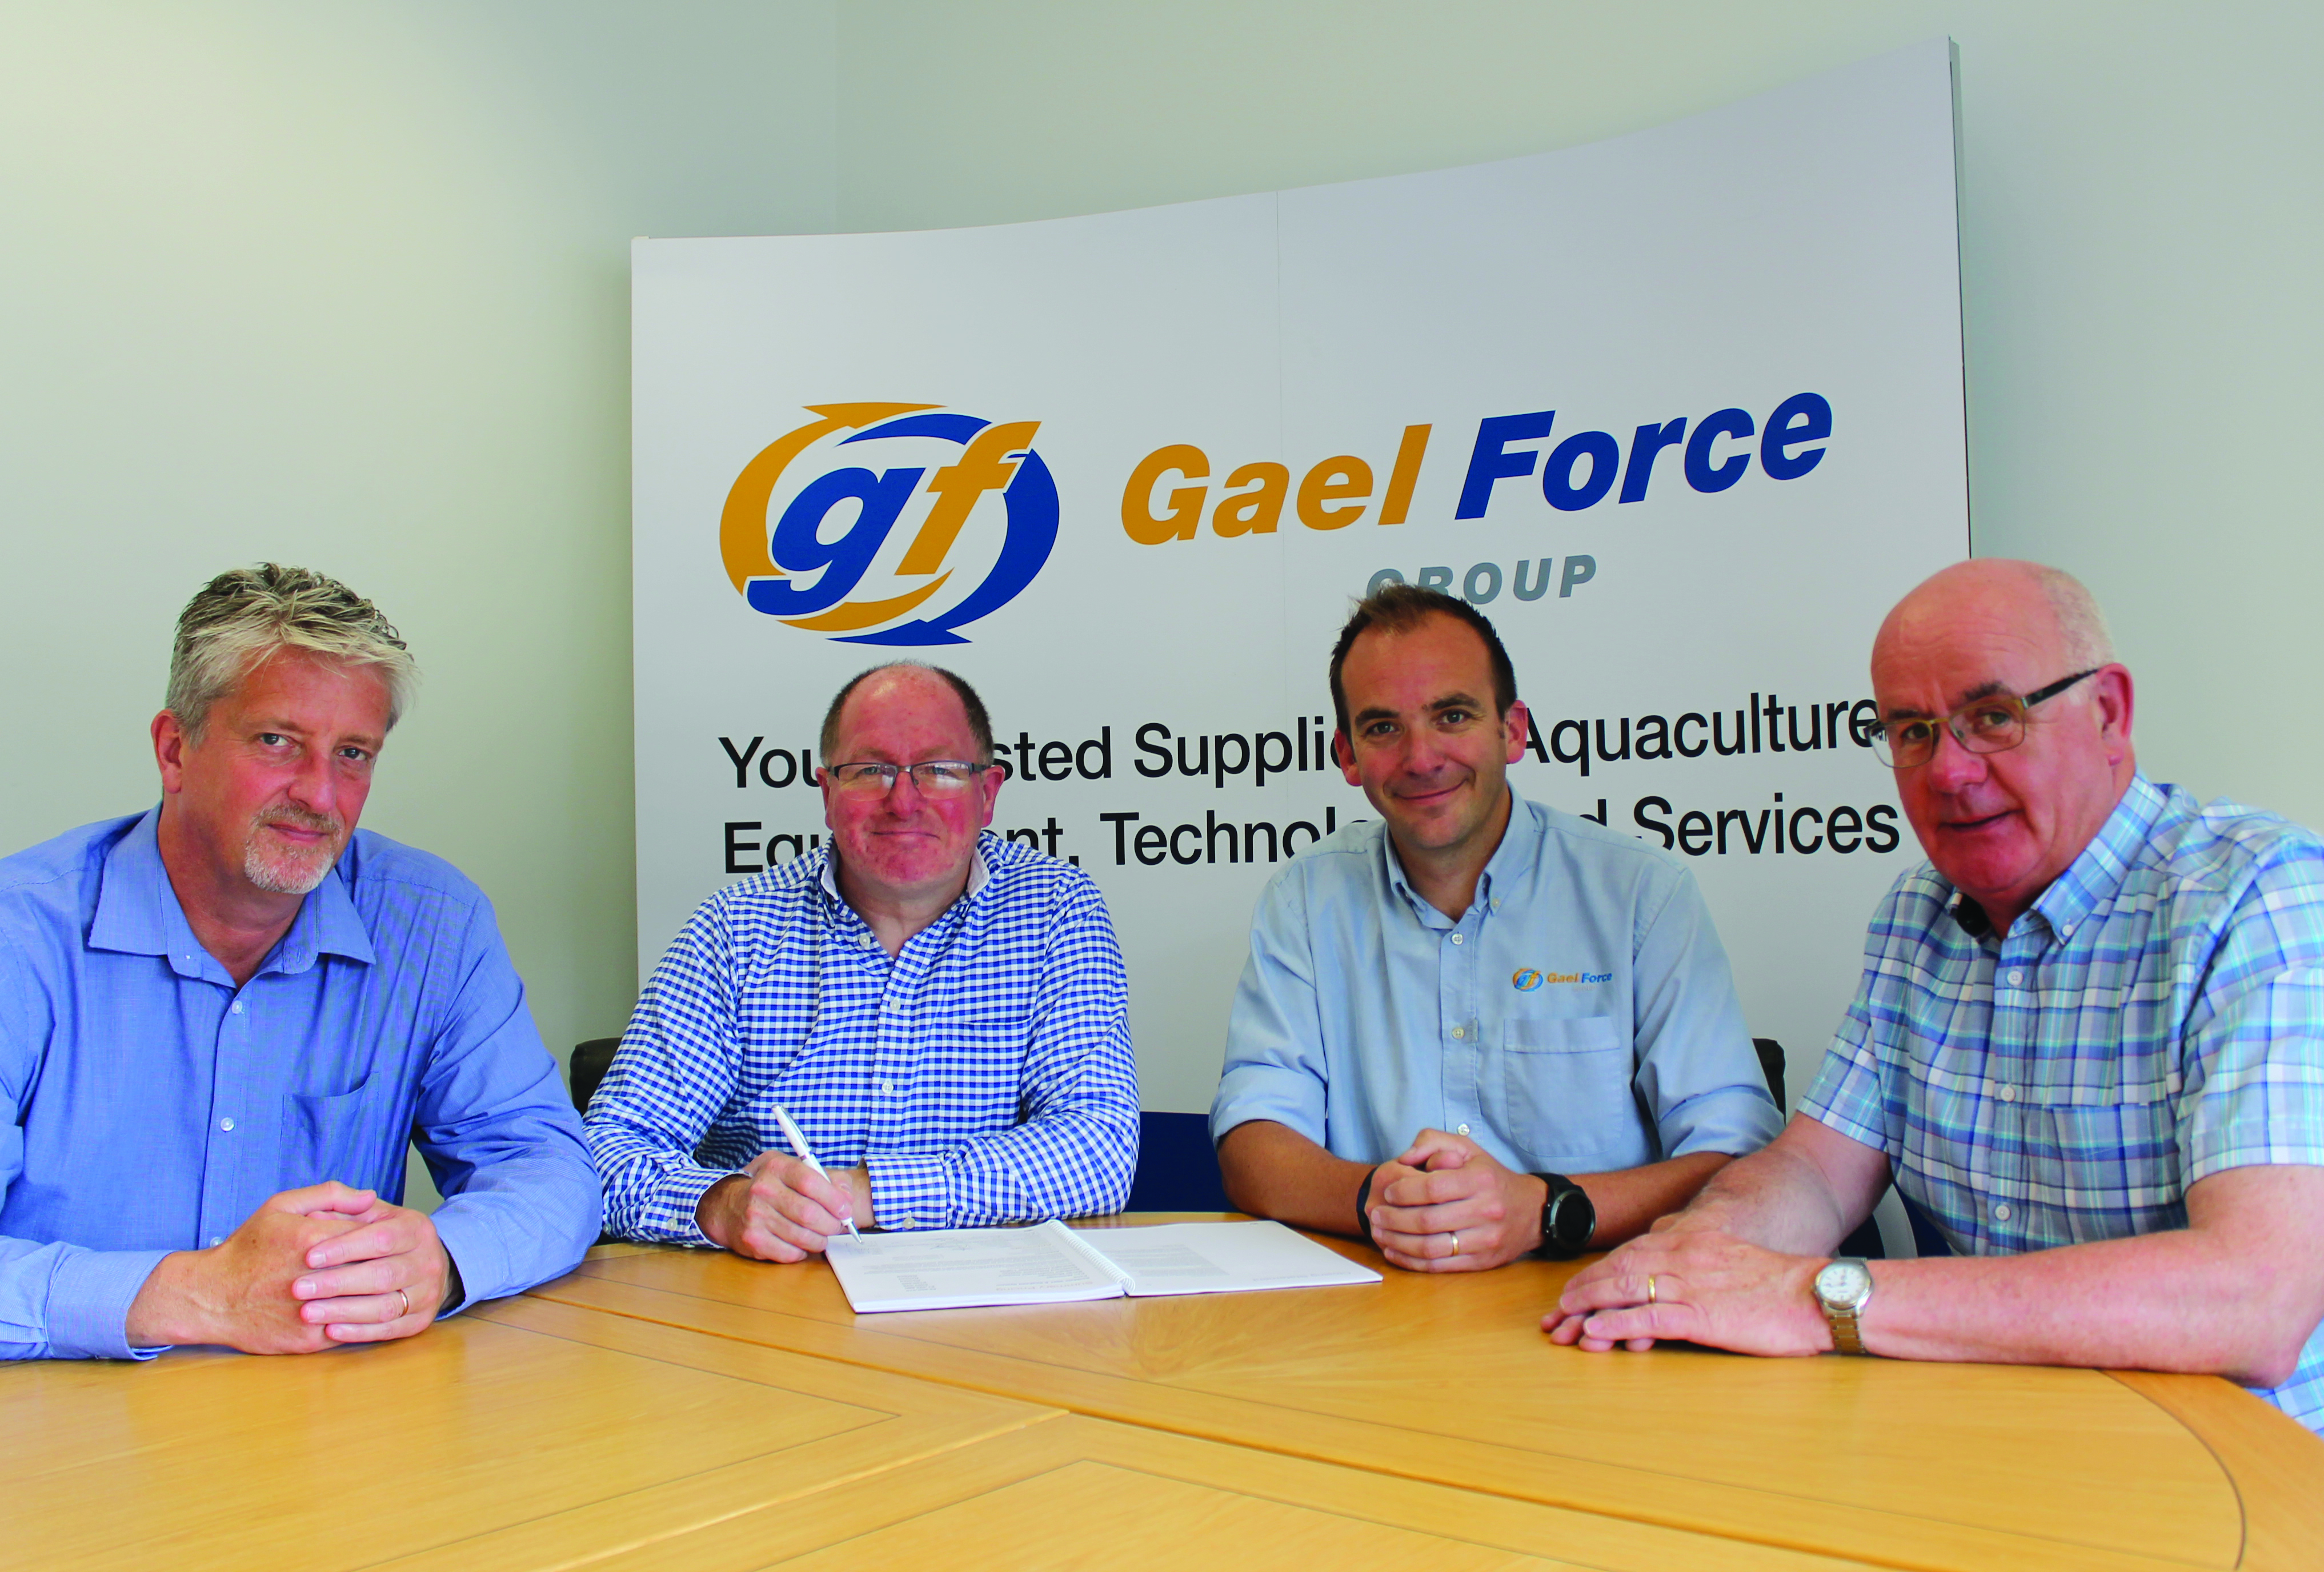 (From left to right): Robert Gray (director, Organic Sea Harvest), Alex MacInnes (director, Organic Sea Harvest), Jamie Young (sales director, Gael Force Group), Alister Mackinnon (director, Organic Sea Harvest)